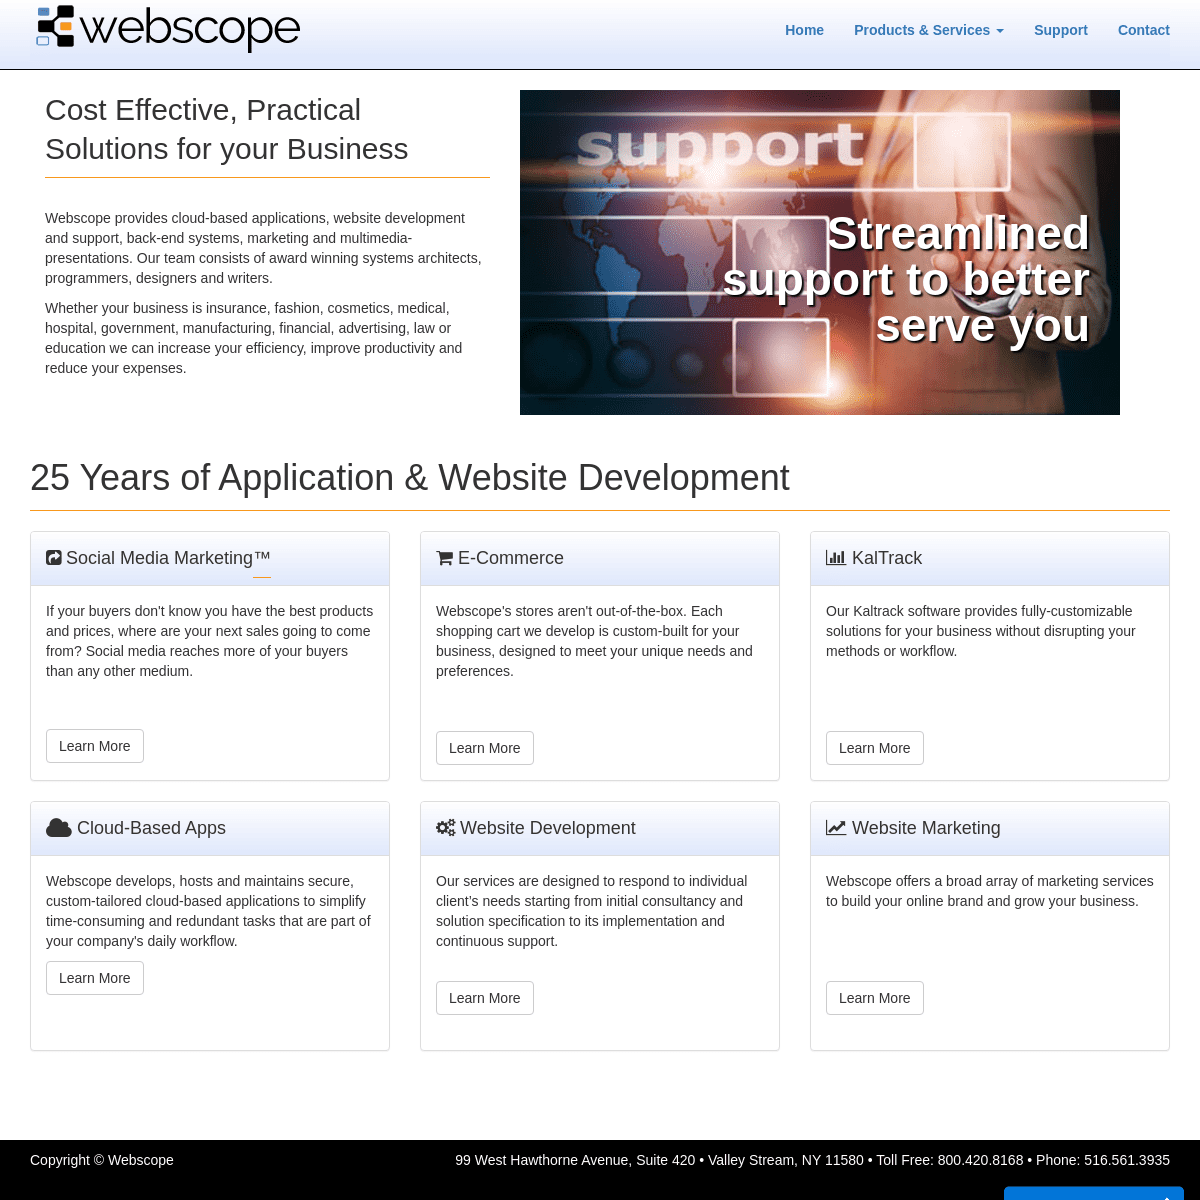 A complete backup of https://webscope.com